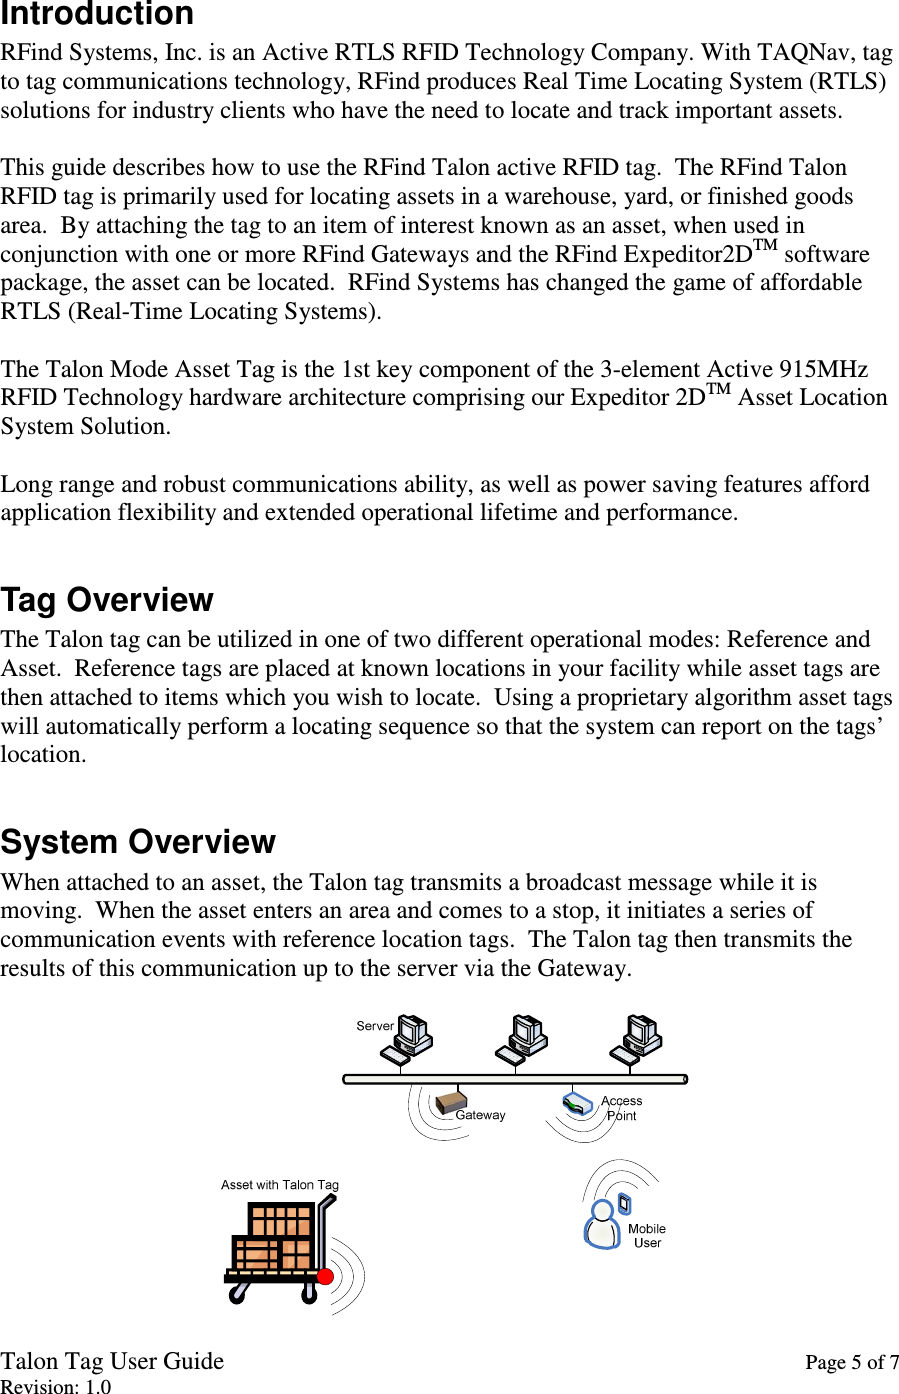 Talon Tag User Guide    Page 5 of 7 Revision: 1.0 Introduction RFind Systems, Inc. is an Active RTLS RFID Technology Company. With TAQNav, tag to tag communications technology, RFind produces Real Time Locating System (RTLS) solutions for industry clients who have the need to locate and track important assets.  This guide describes how to use the RFind Talon active RFID tag.  The RFind Talon RFID tag is primarily used for locating assets in a warehouse, yard, or finished goods area.  By attaching the tag to an item of interest known as an asset, when used in conjunction with one or more RFind Gateways and the RFind Expeditor2DTM software package, the asset can be located.  RFind Systems has changed the game of affordable RTLS (Real-Time Locating Systems).  The Talon Mode Asset Tag is the 1st key component of the 3-element Active 915MHz RFID Technology hardware architecture comprising our Expeditor 2DTM Asset Location System Solution.  Long range and robust communications ability, as well as power saving features afford application flexibility and extended operational lifetime and performance.  Tag Overview The Talon tag can be utilized in one of two different operational modes: Reference and Asset.  Reference tags are placed at known locations in your facility while asset tags are then attached to items which you wish to locate.  Using a proprietary algorithm asset tags will automatically perform a locating sequence so that the system can report on the tags’ location.  System Overview When attached to an asset, the Talon tag transmits a broadcast message while it is moving.  When the asset enters an area and comes to a stop, it initiates a series of communication events with reference location tags.  The Talon tag then transmits the results of this communication up to the server via the Gateway.   